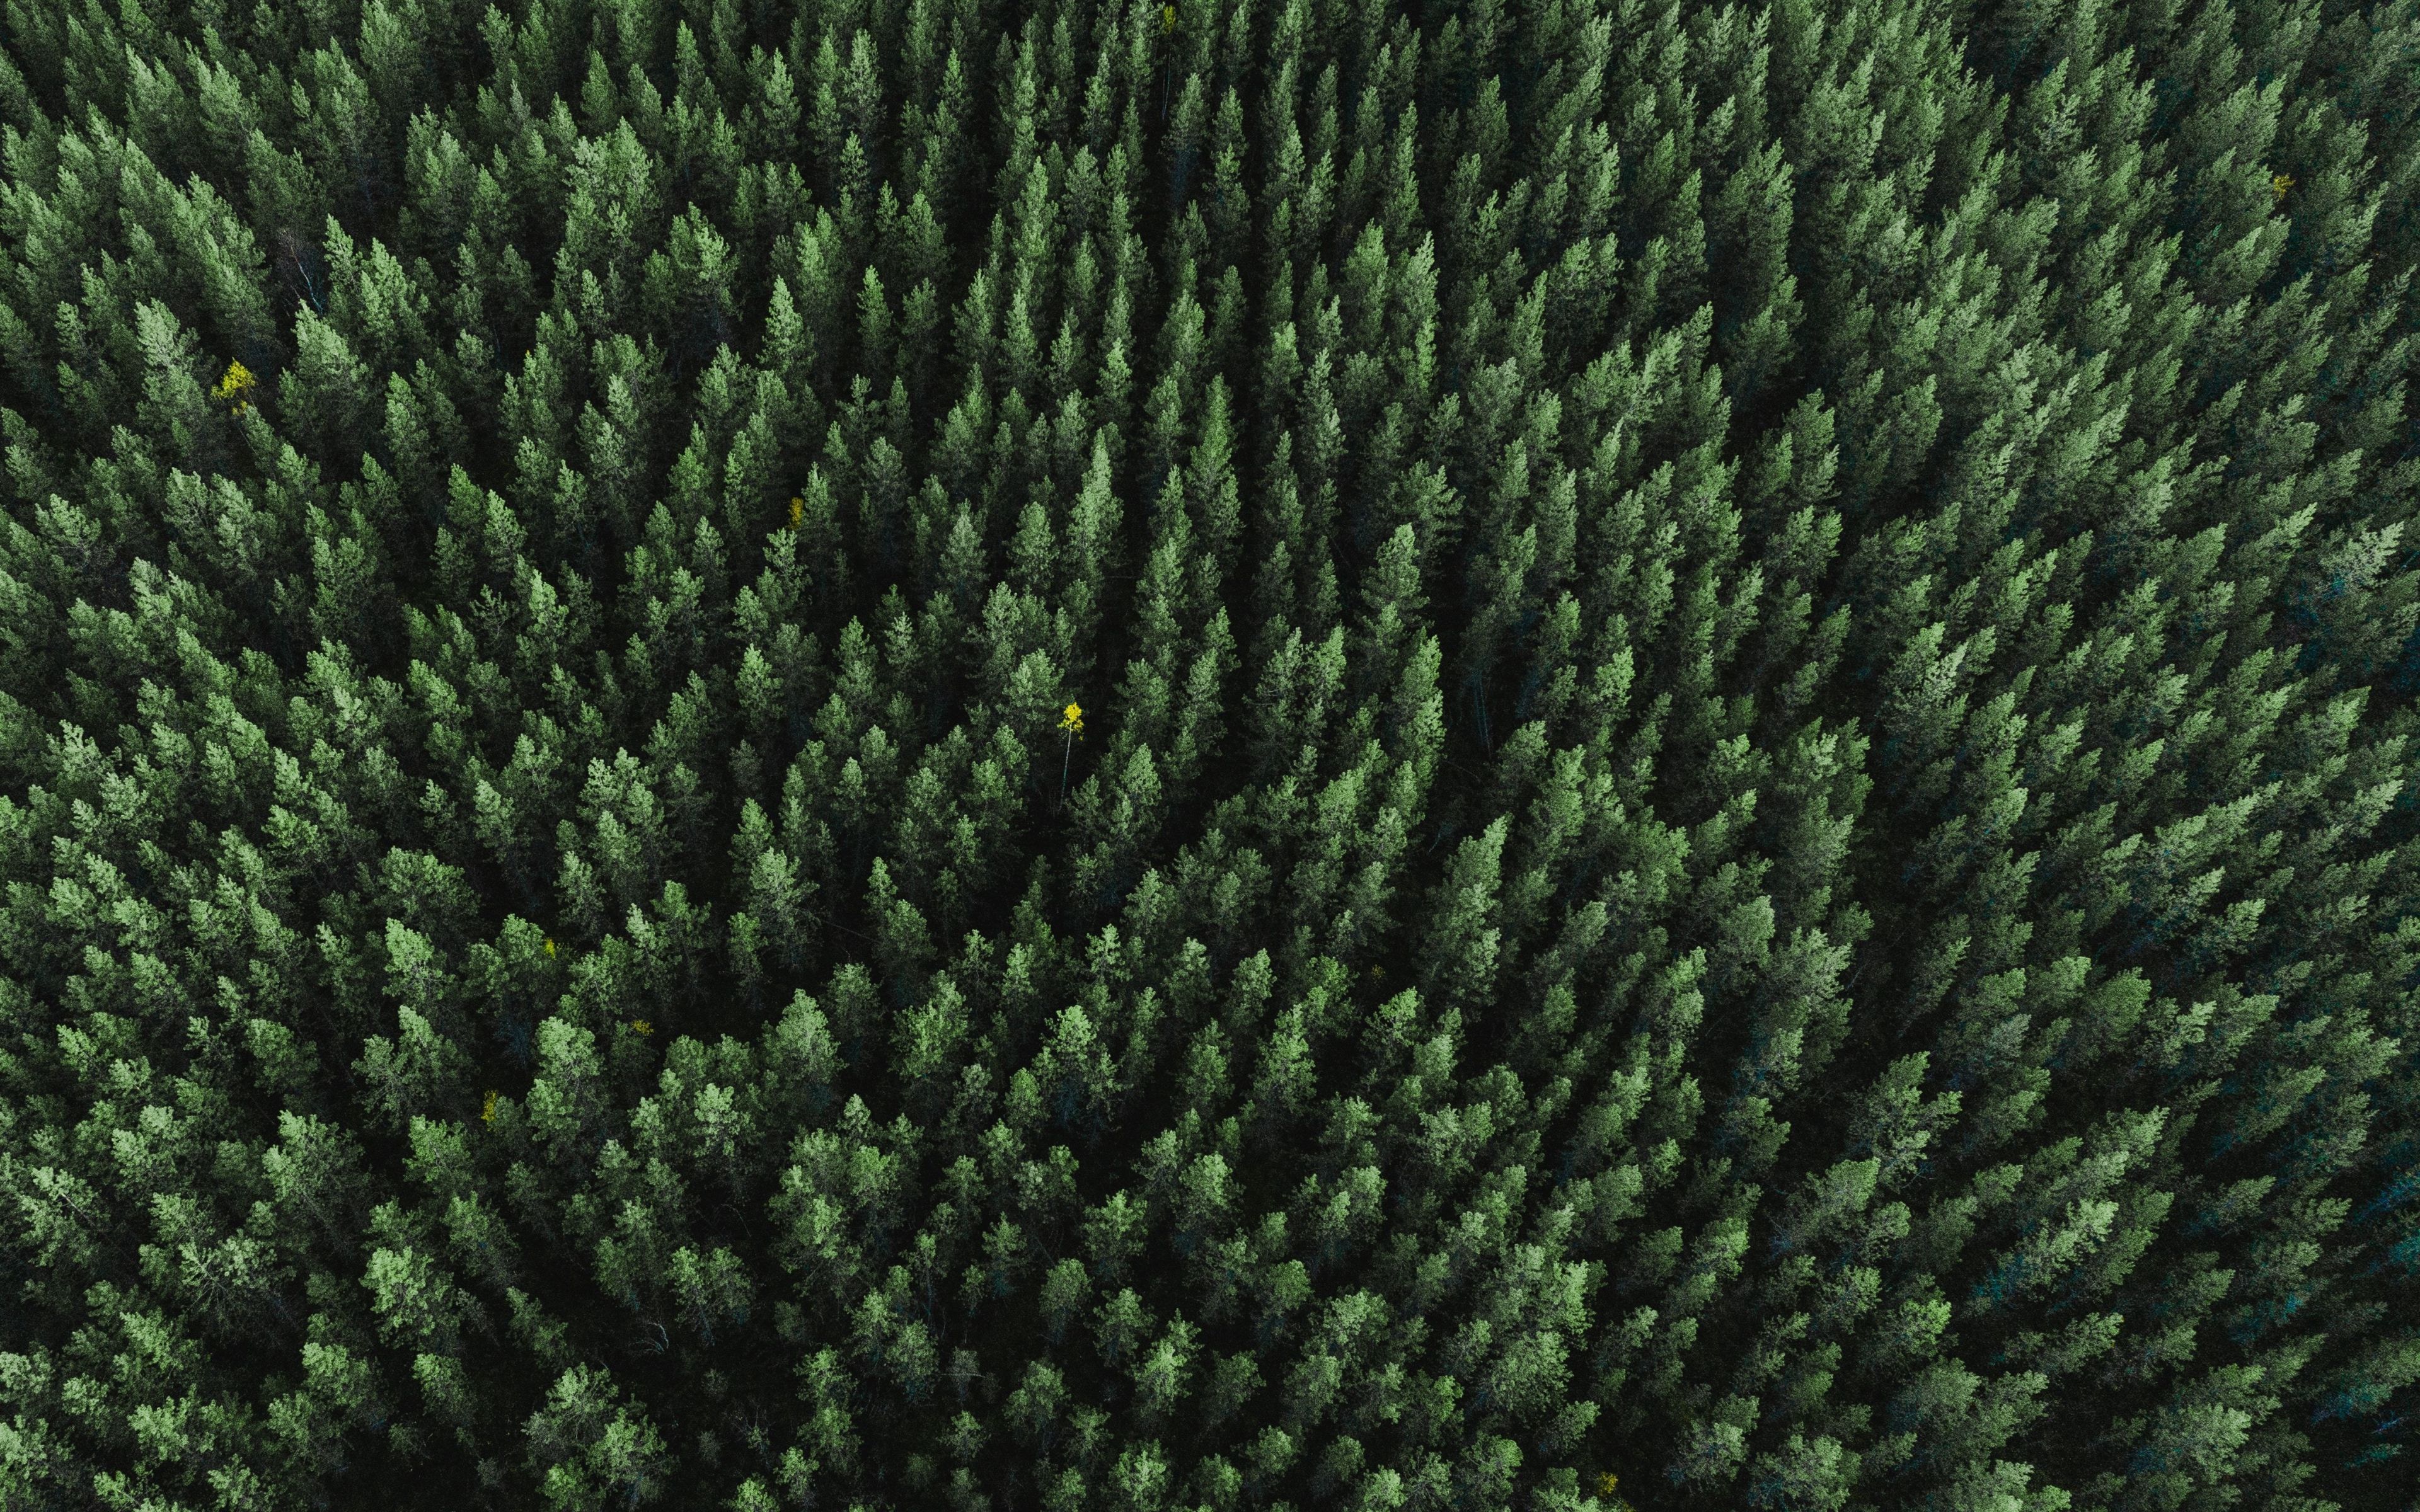 Download 3840x2400 wallpaper forest, aerial view, trees, green, nature, 4k, ultra HD 16: widescreen, 3840x2400 HD image, background, 23016